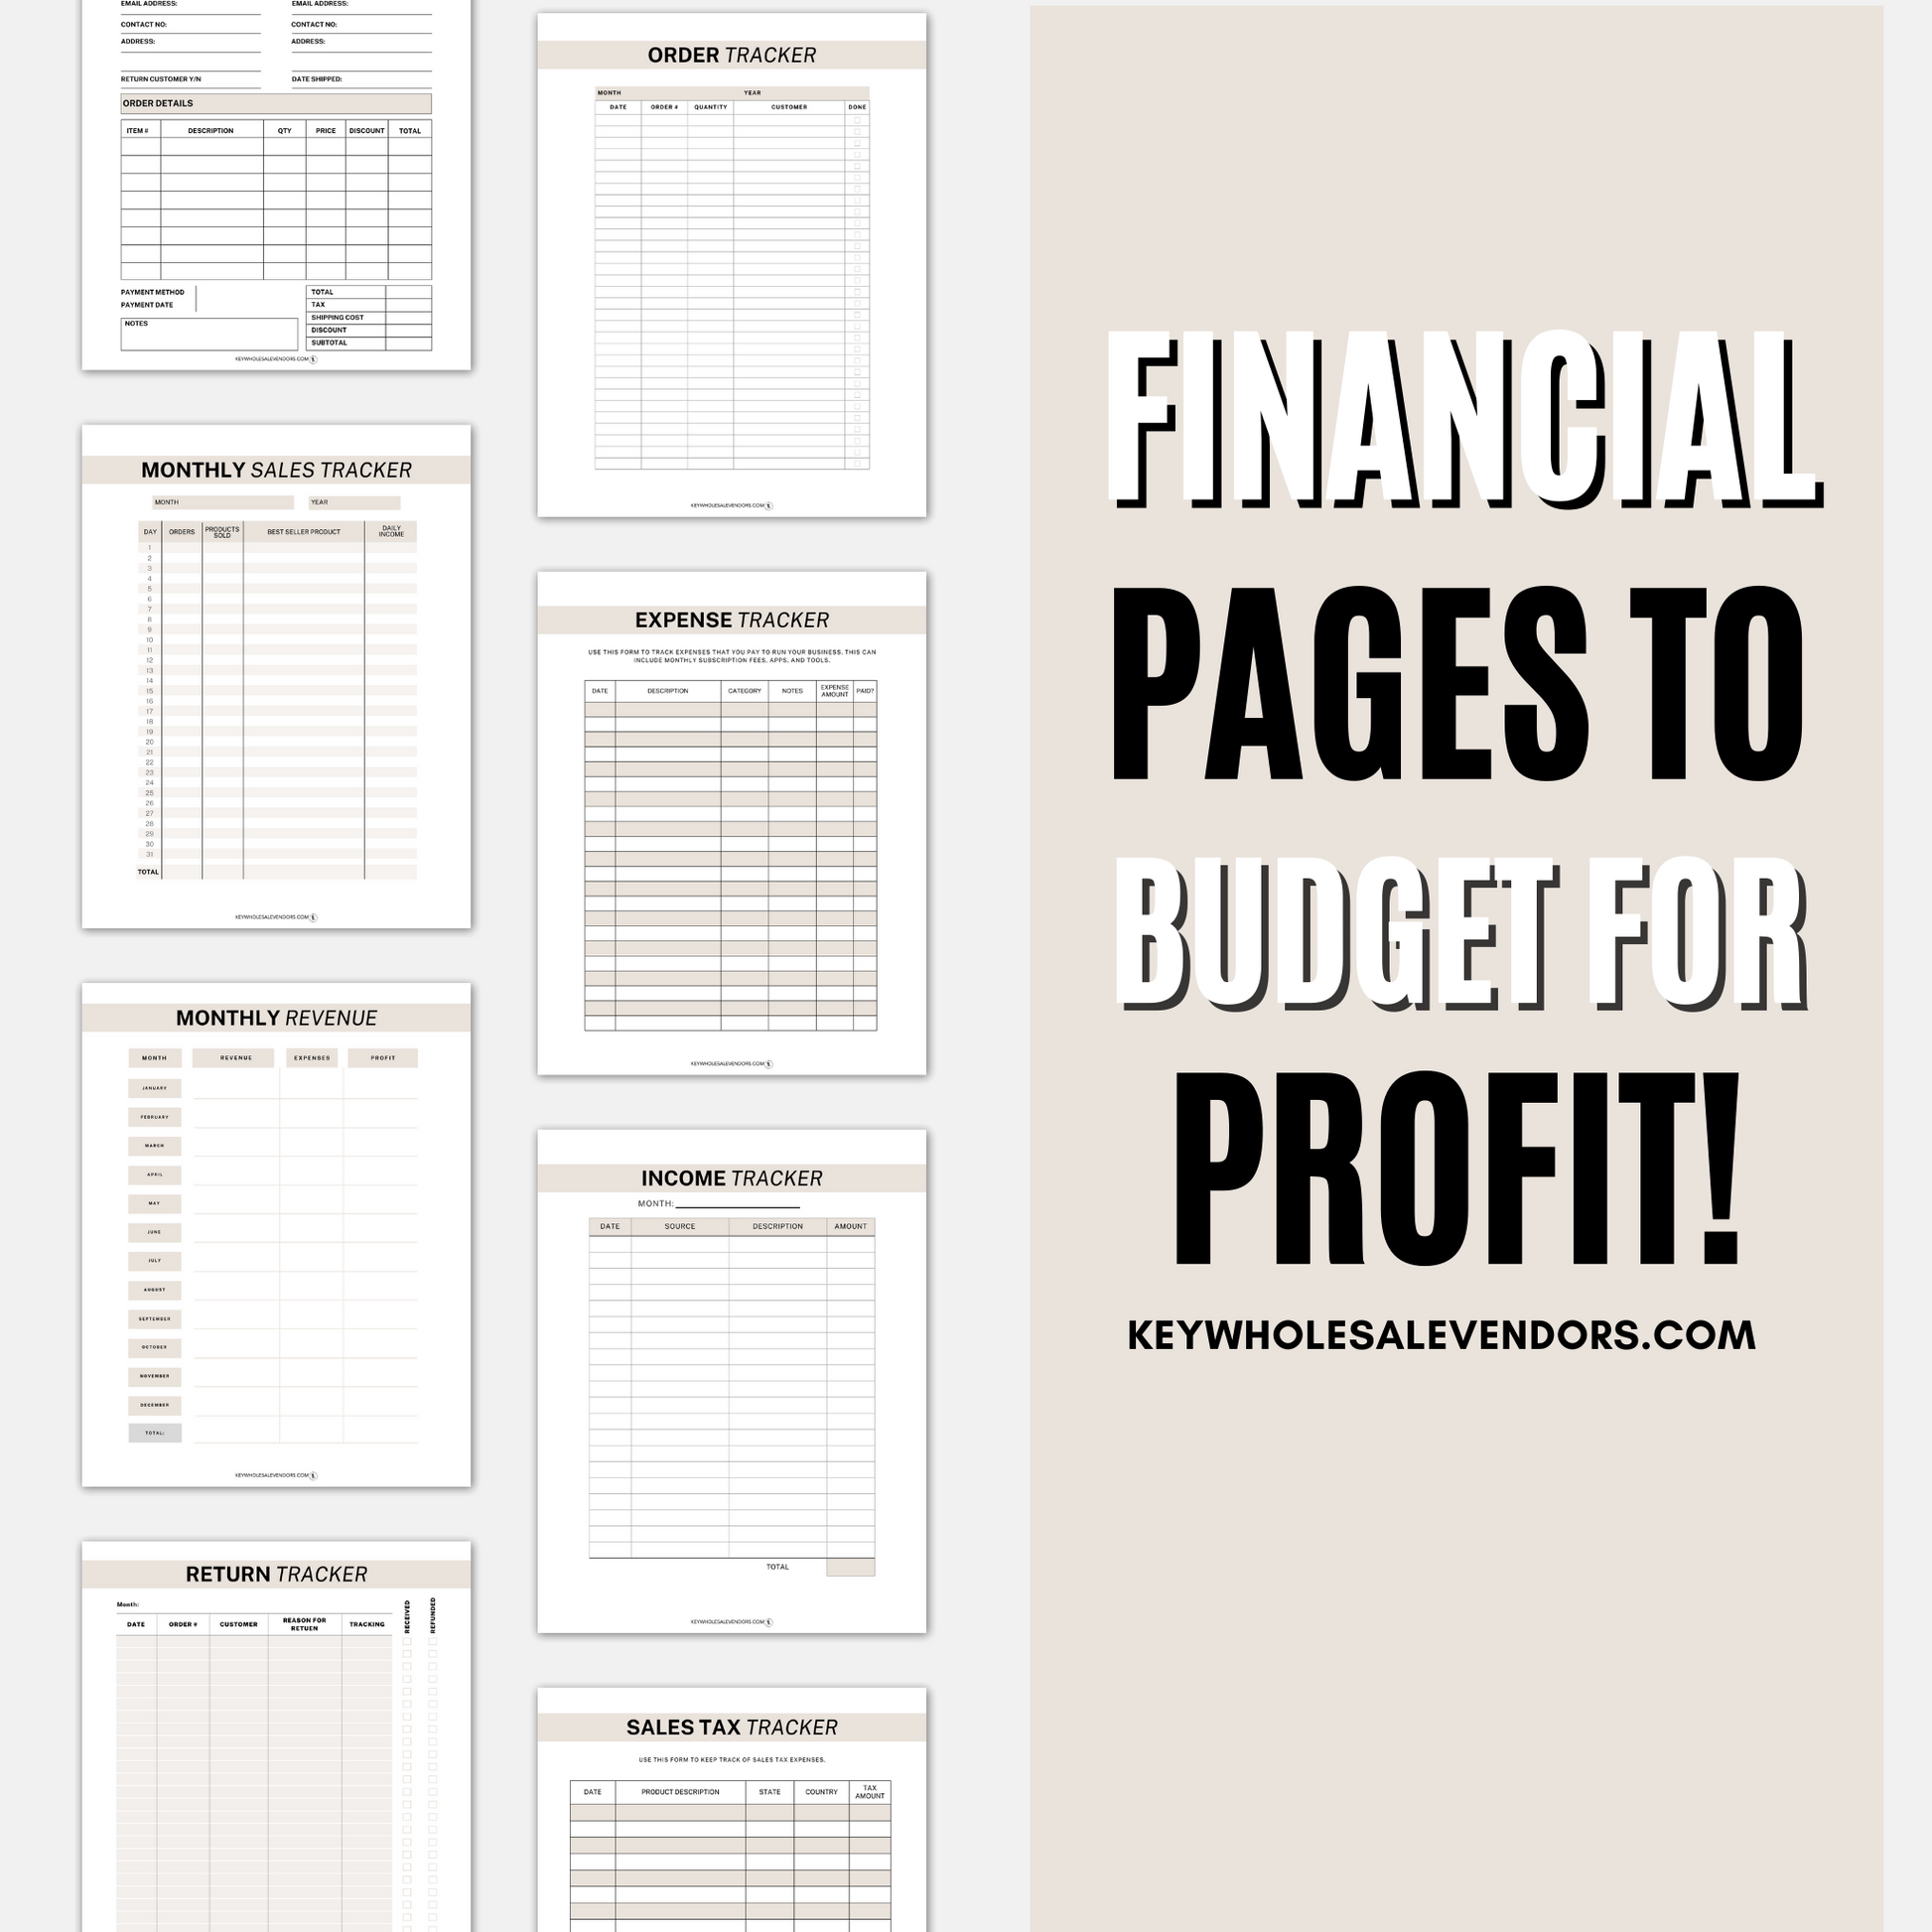 Manage Financials for your small business